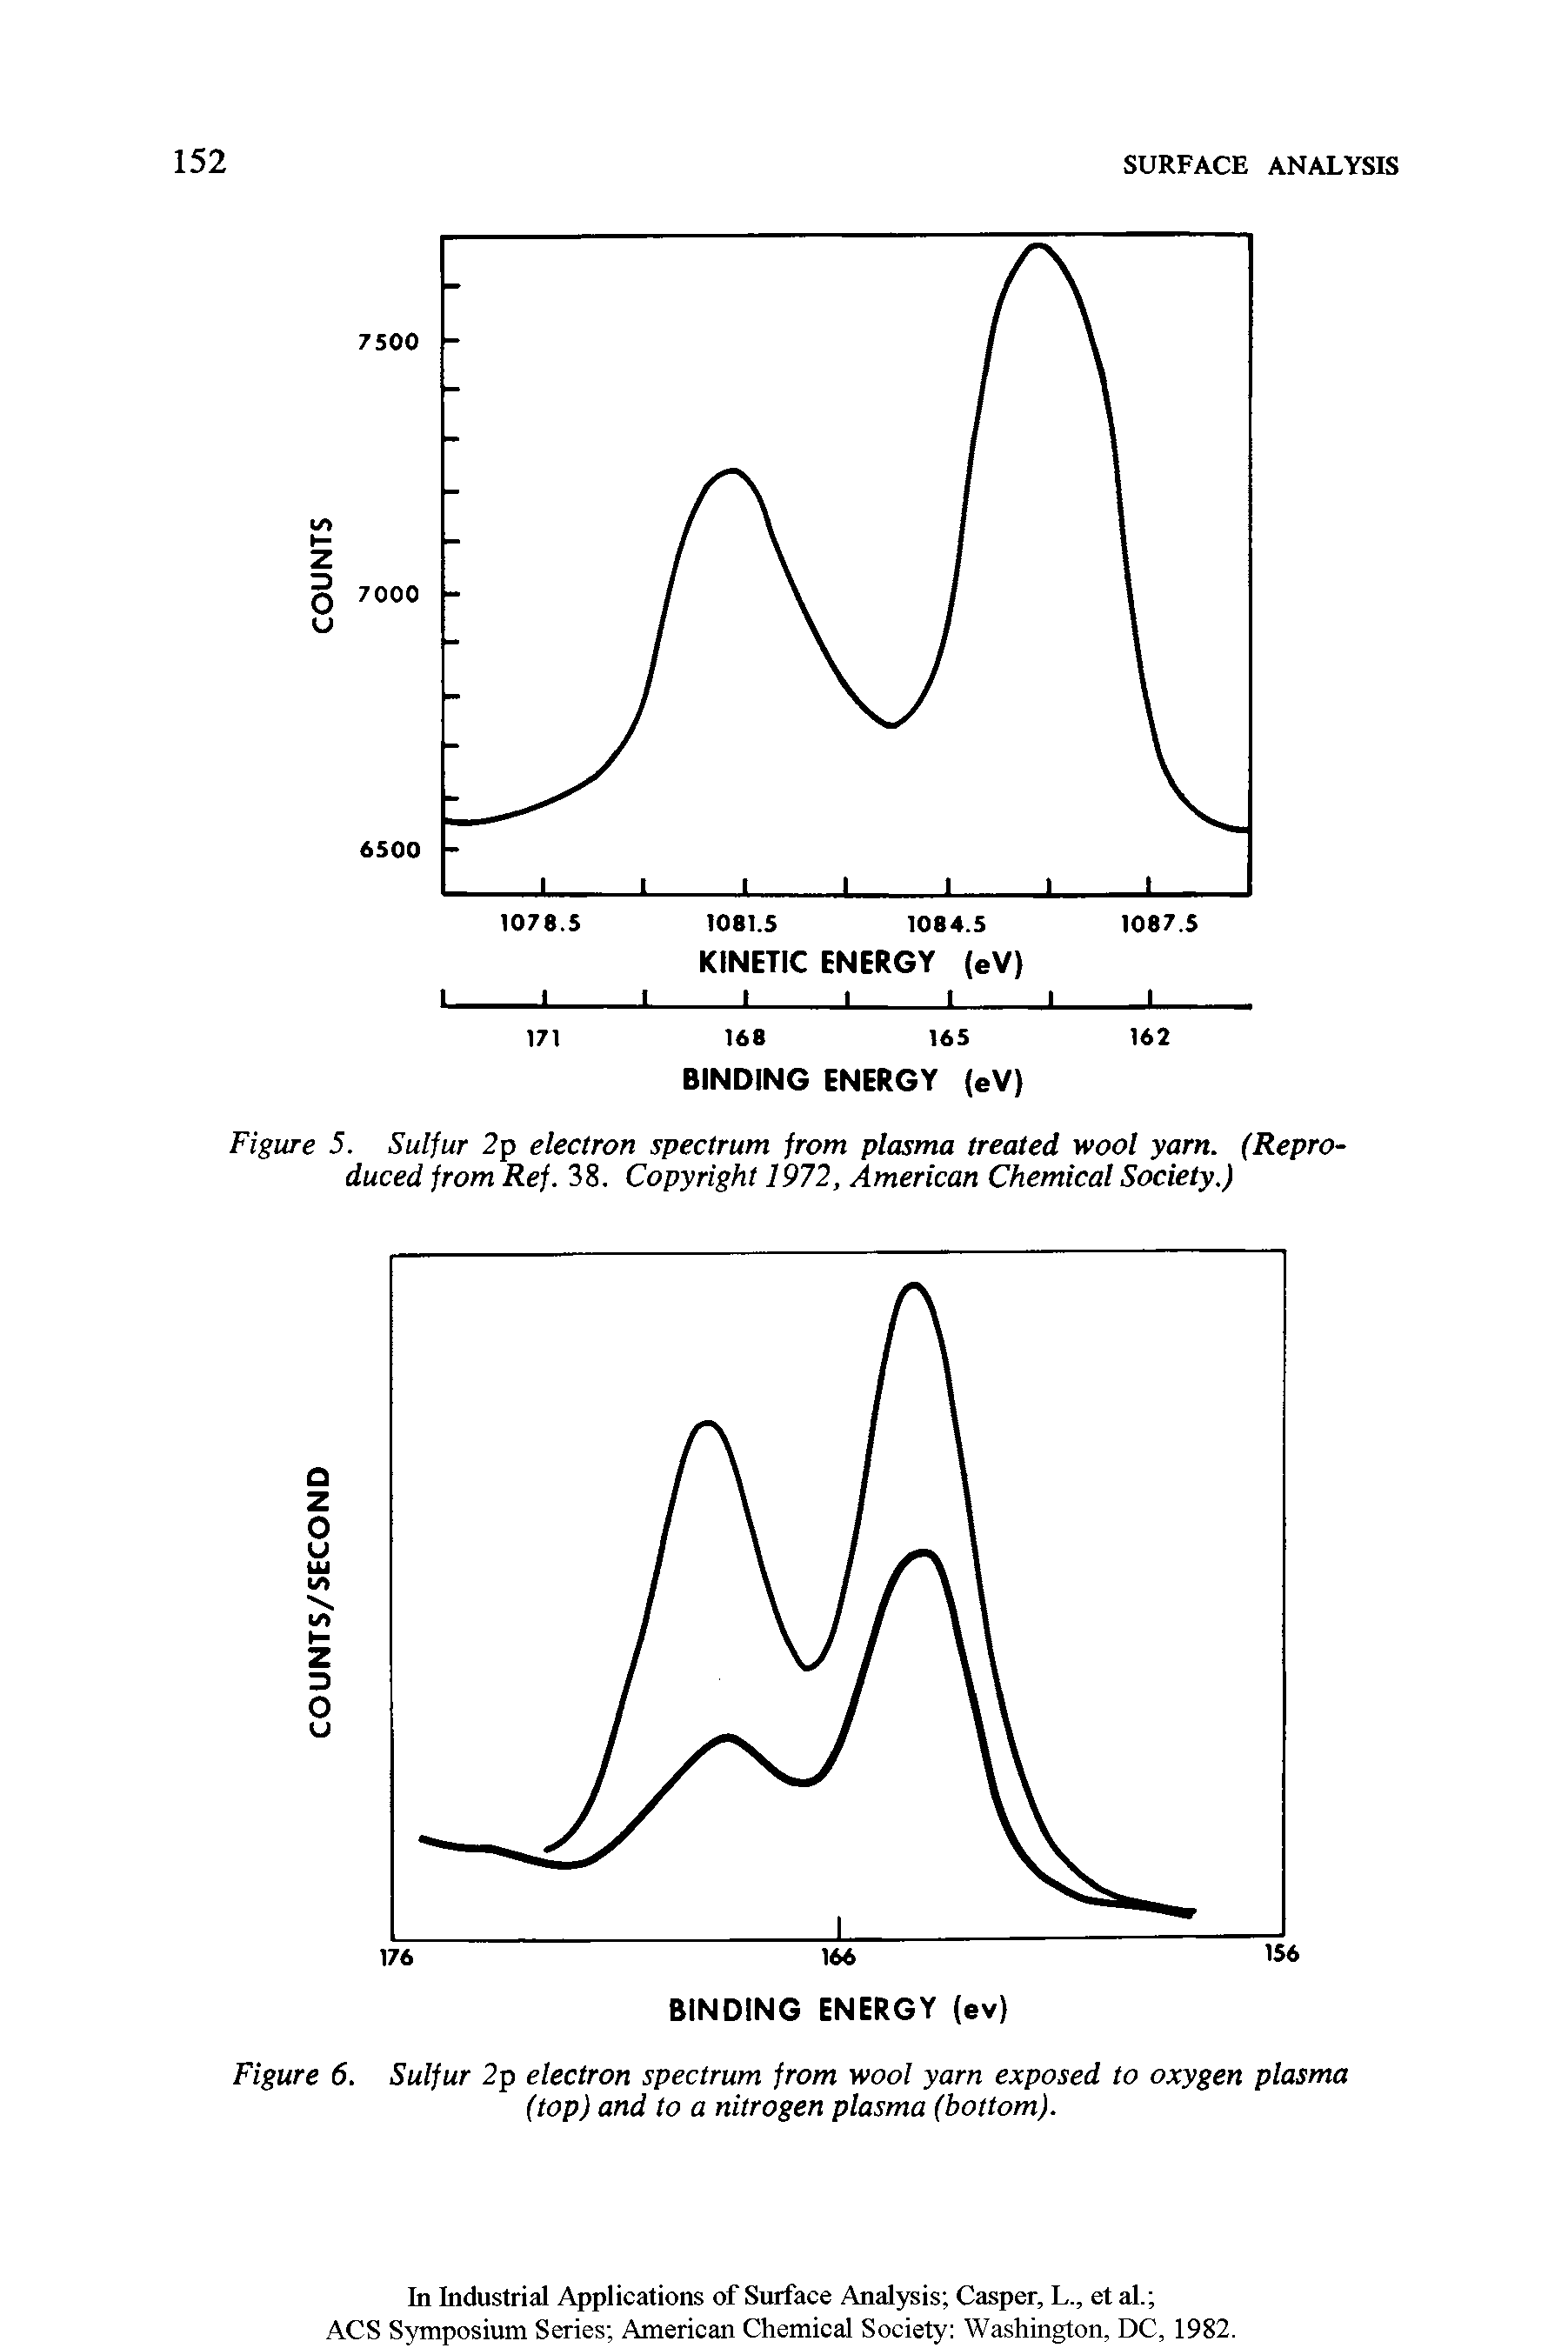 Figure 6. Sulfur 2p electron spectrum from wool yarn exposed to oxygen plasma (top) and to a nitrogen plasma (bottom).